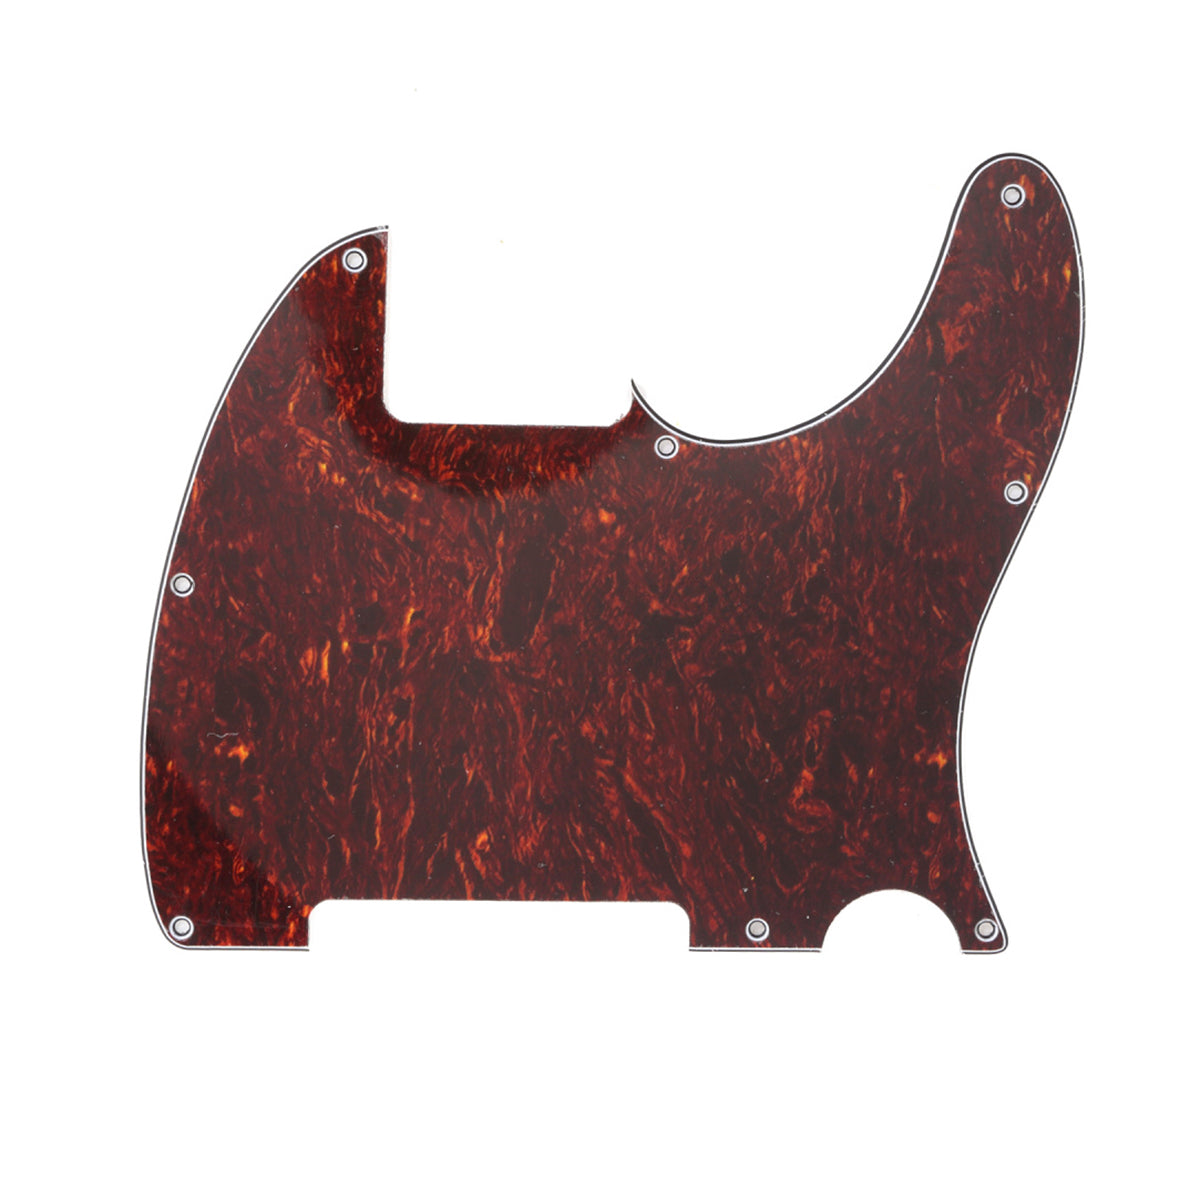 Musiclily 8 Hole Tele Pickguard Blank for Fender USA/Mexican Telecaster Esquire Guitar, 4Ply Red Tortoise